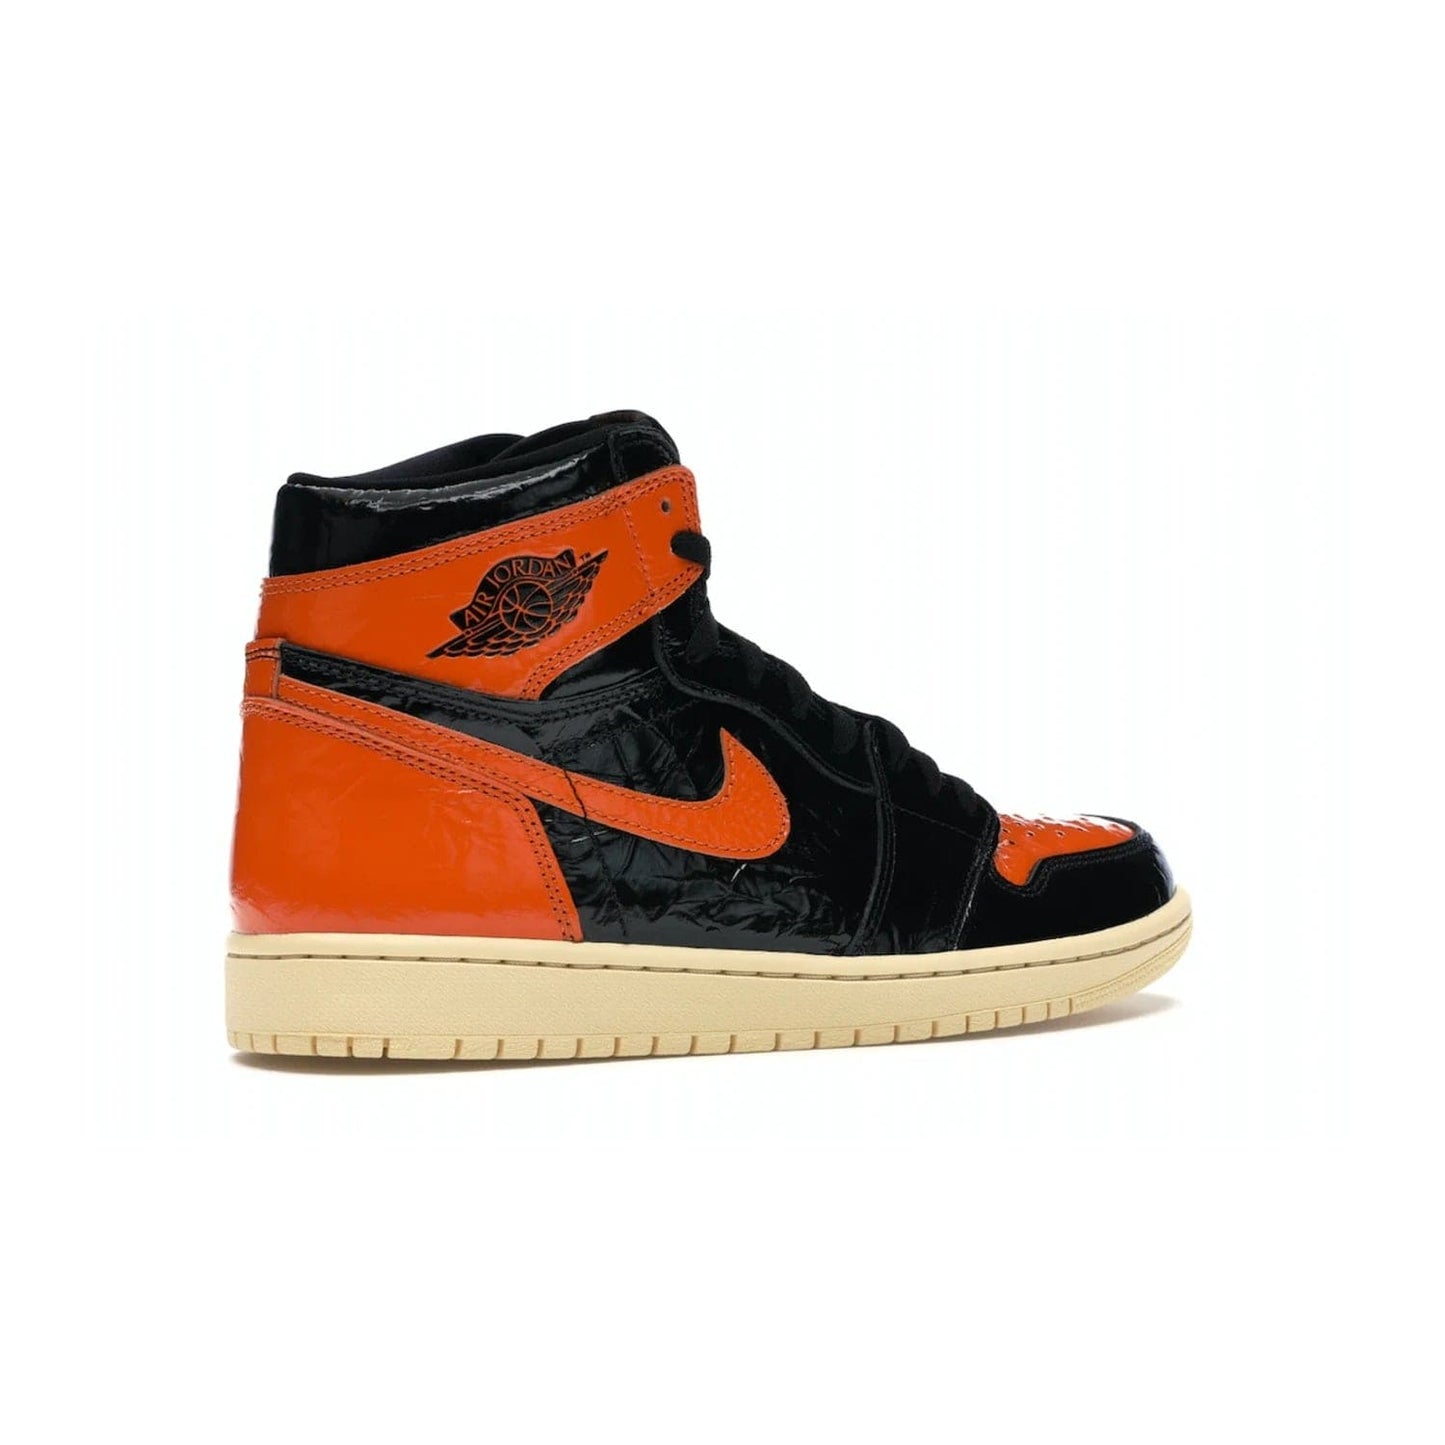 Jordan 1 Retro High Shattered Backboard 3.0 - Image 34 - Only at www.BallersClubKickz.com - #
Jordan 1 Retro High Shattered Backboard 3.0: the perfect blend of modern style and nostalgic flair featuring an orange and black crinkled patent leather upper and yellowed vanilla outsole. Get these exclusive sneakers released in October of 2019!